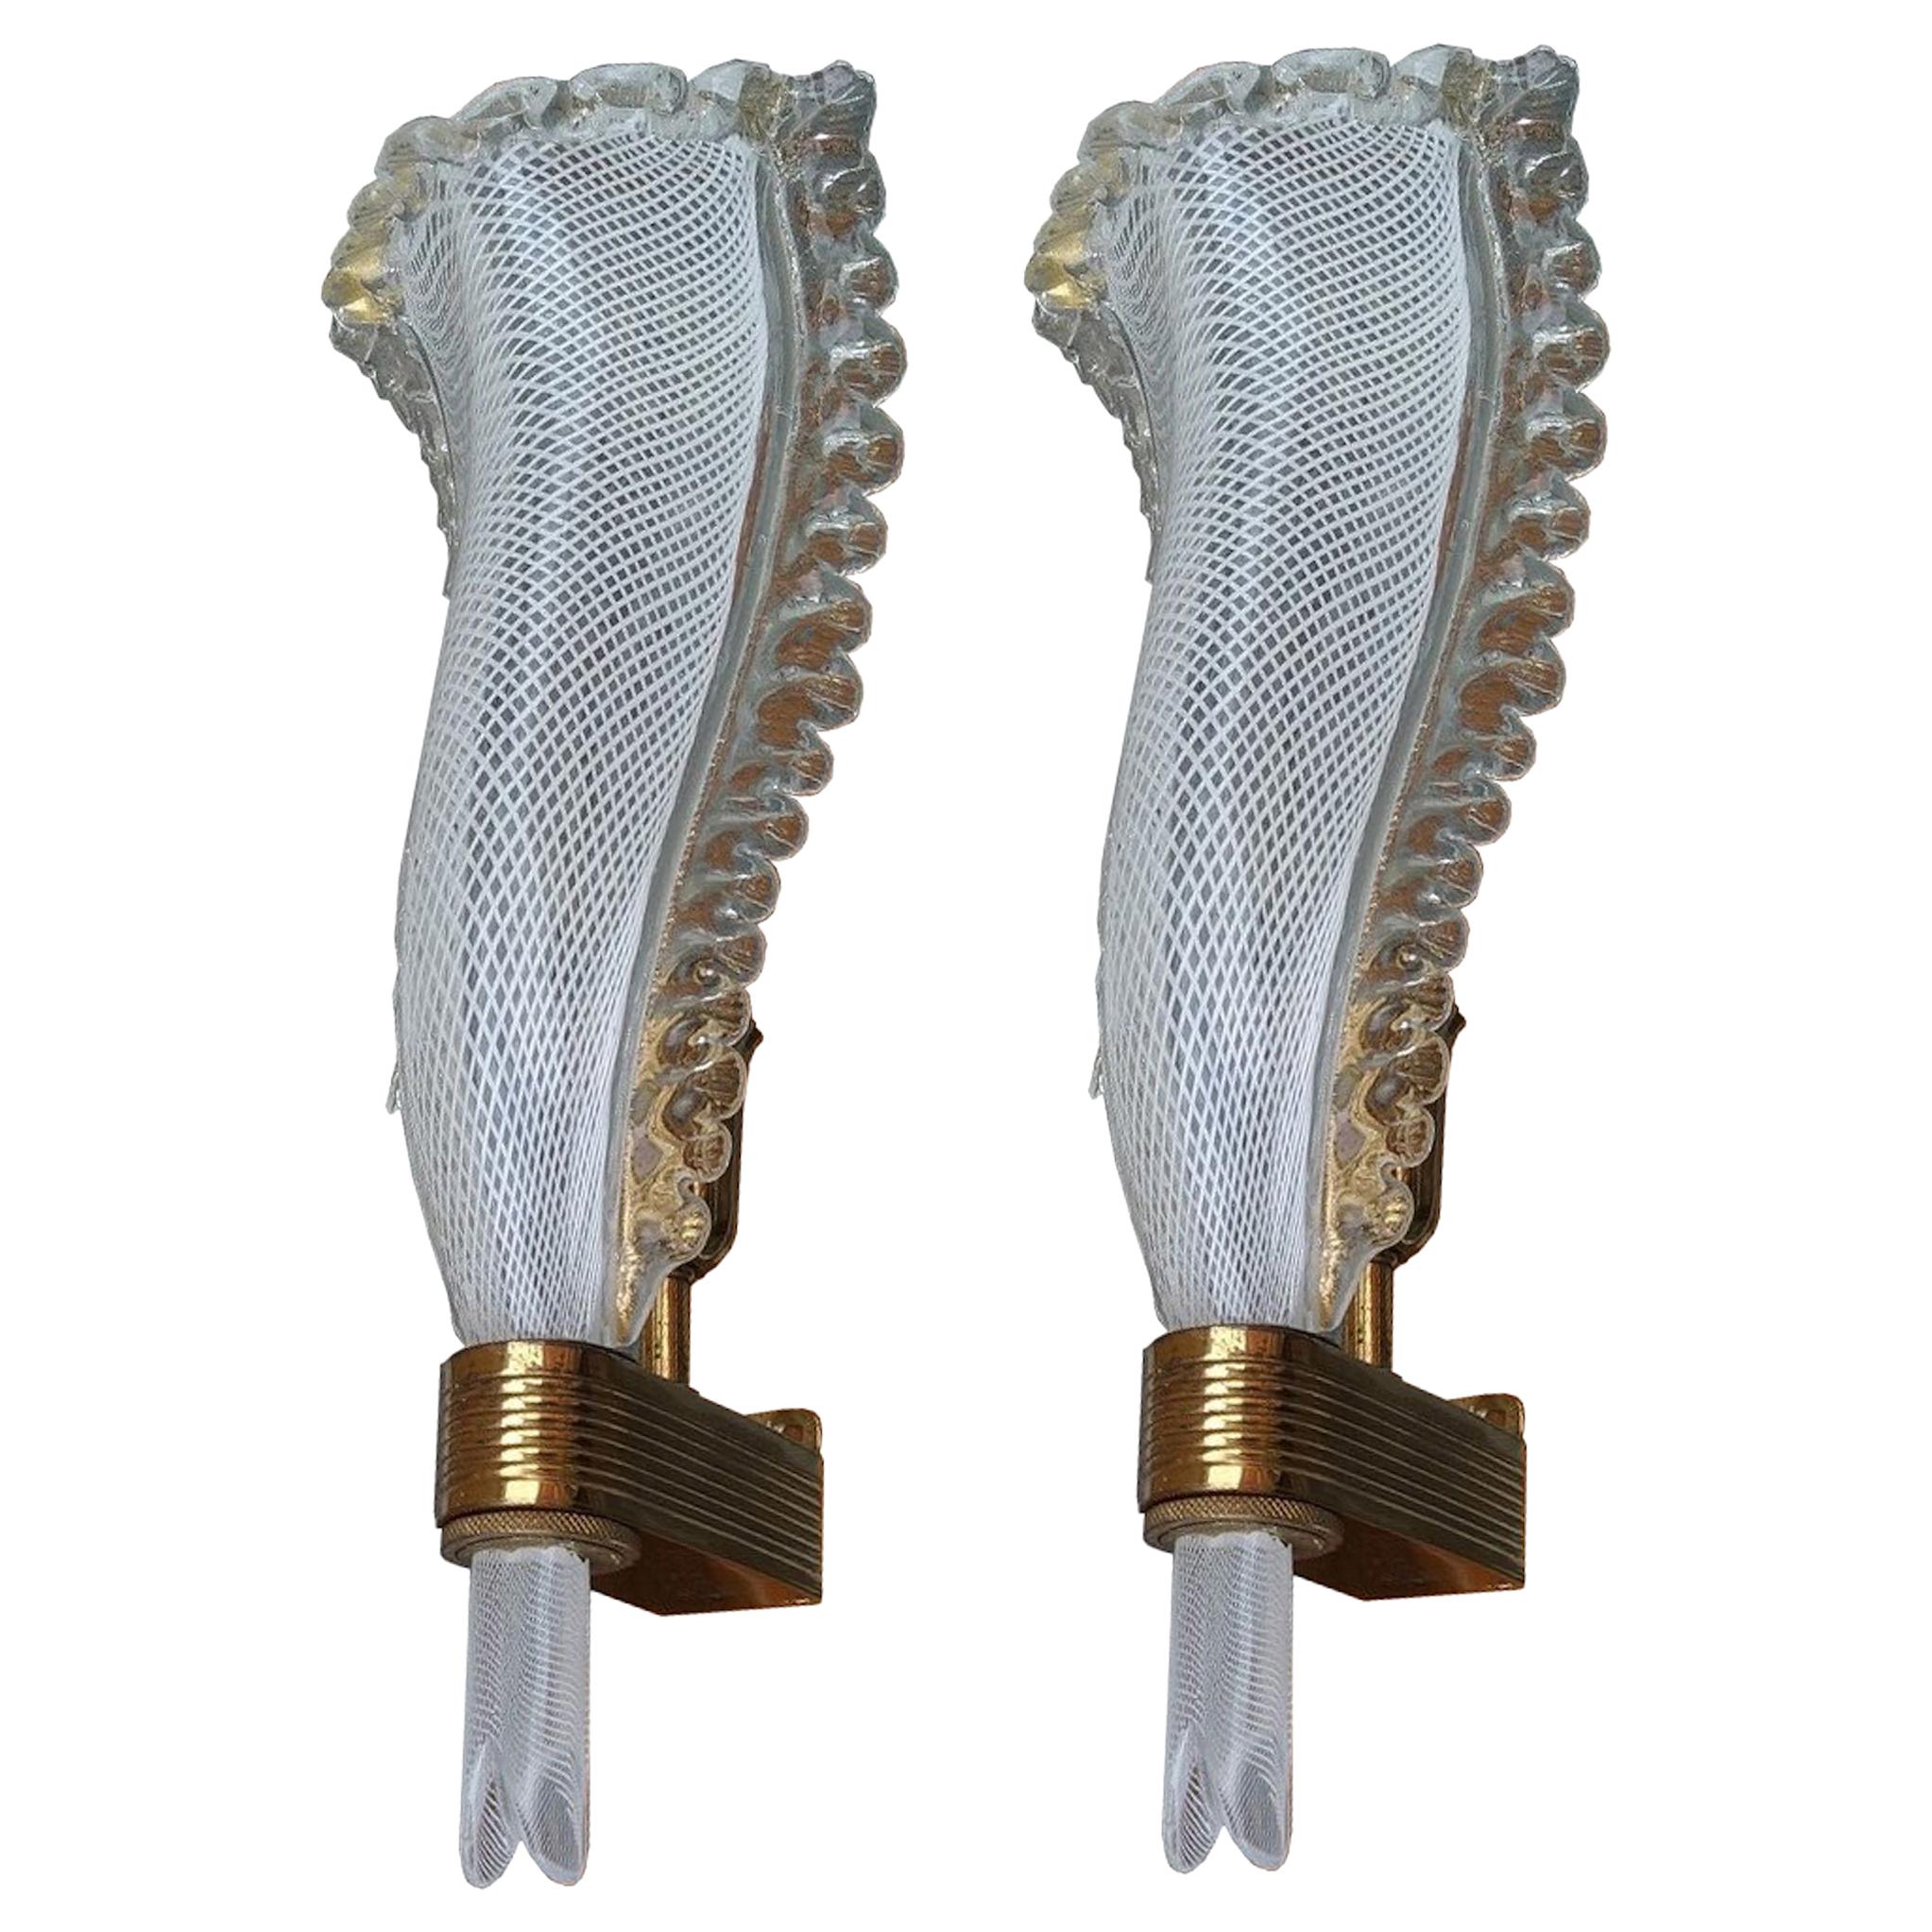 Pair of Sconces "Reticello" by Barovier & Toso, Murano, 1950s